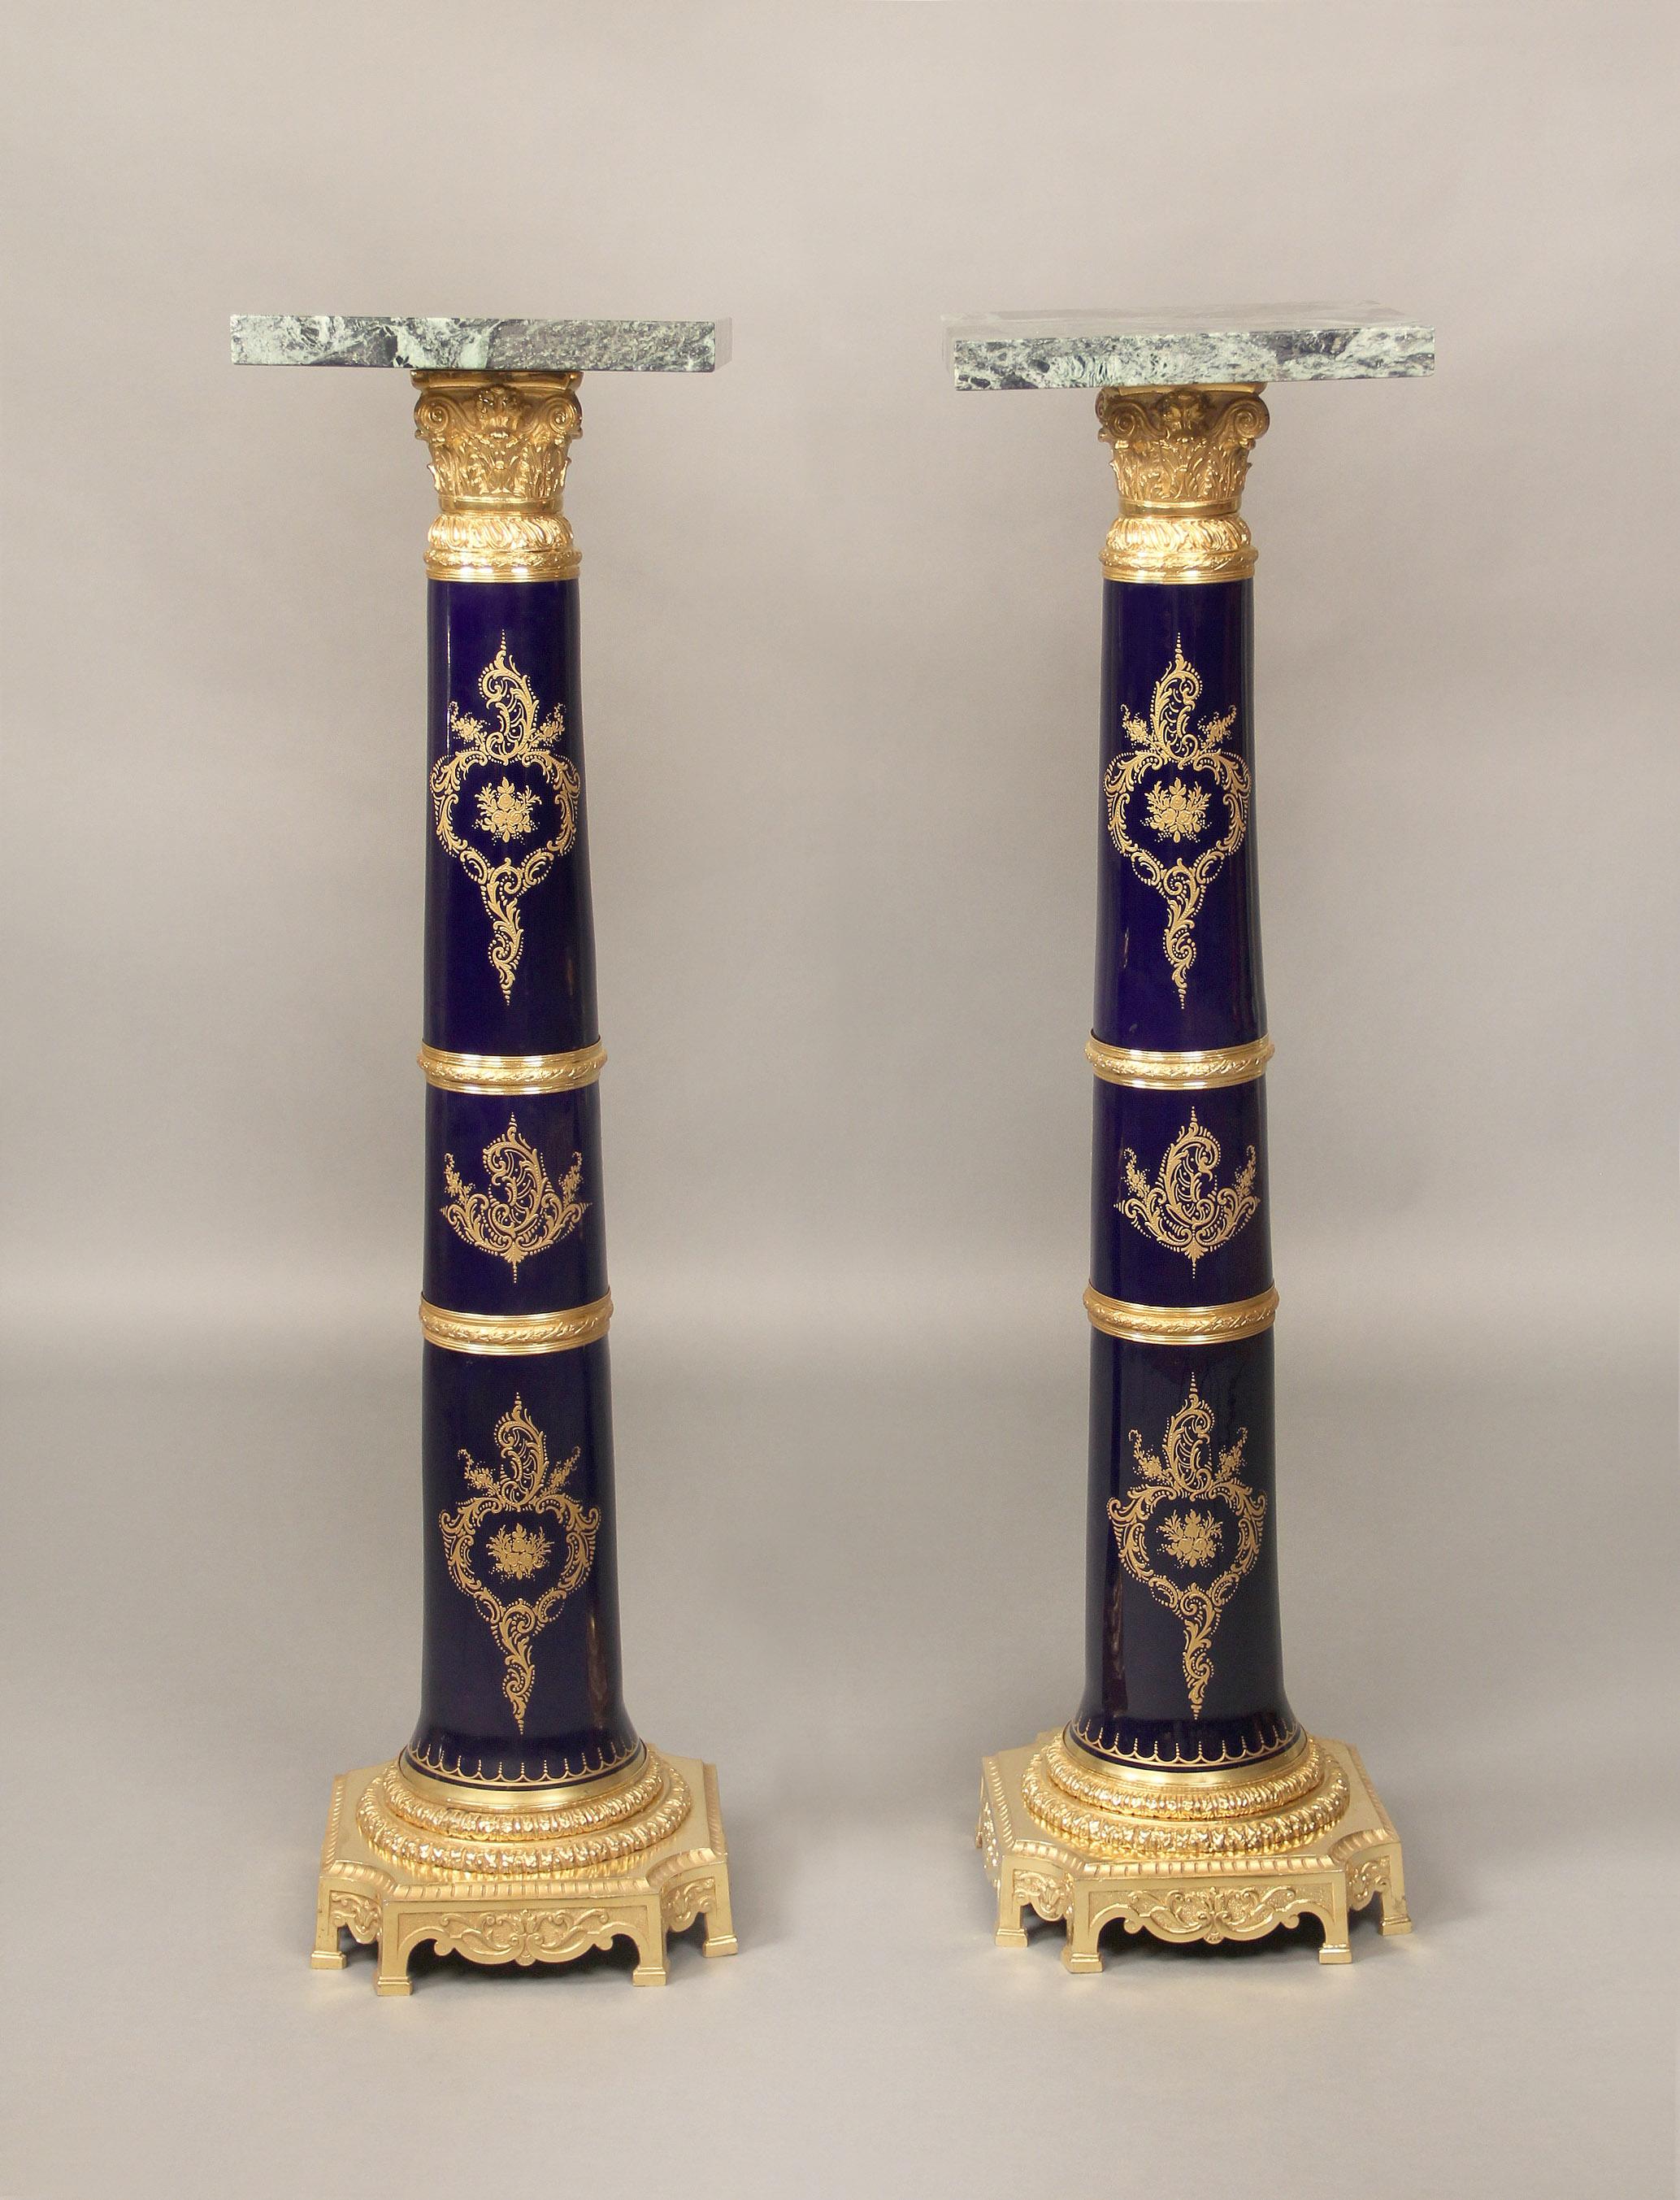 Pair of Late 19th Century Gilt Bronze-Mounted Sèvres Style Pedestals In Good Condition For Sale In New York, NY